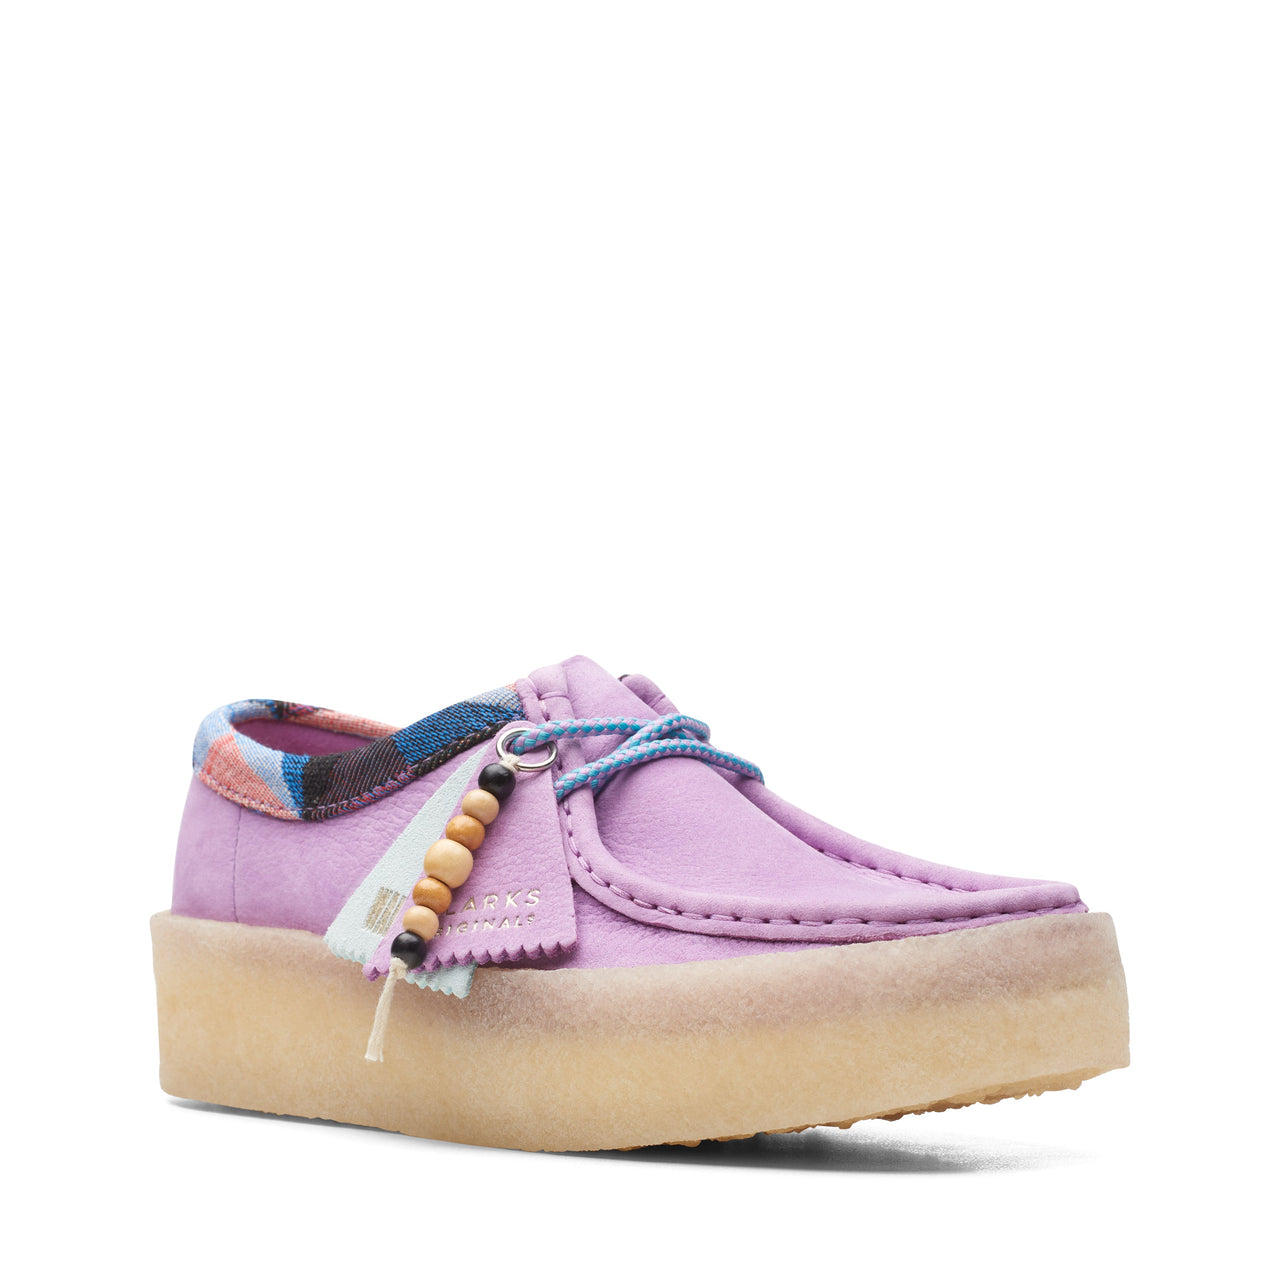  Close-up of light purple suede upper of Clarks Women Wallabee Cup Shoes